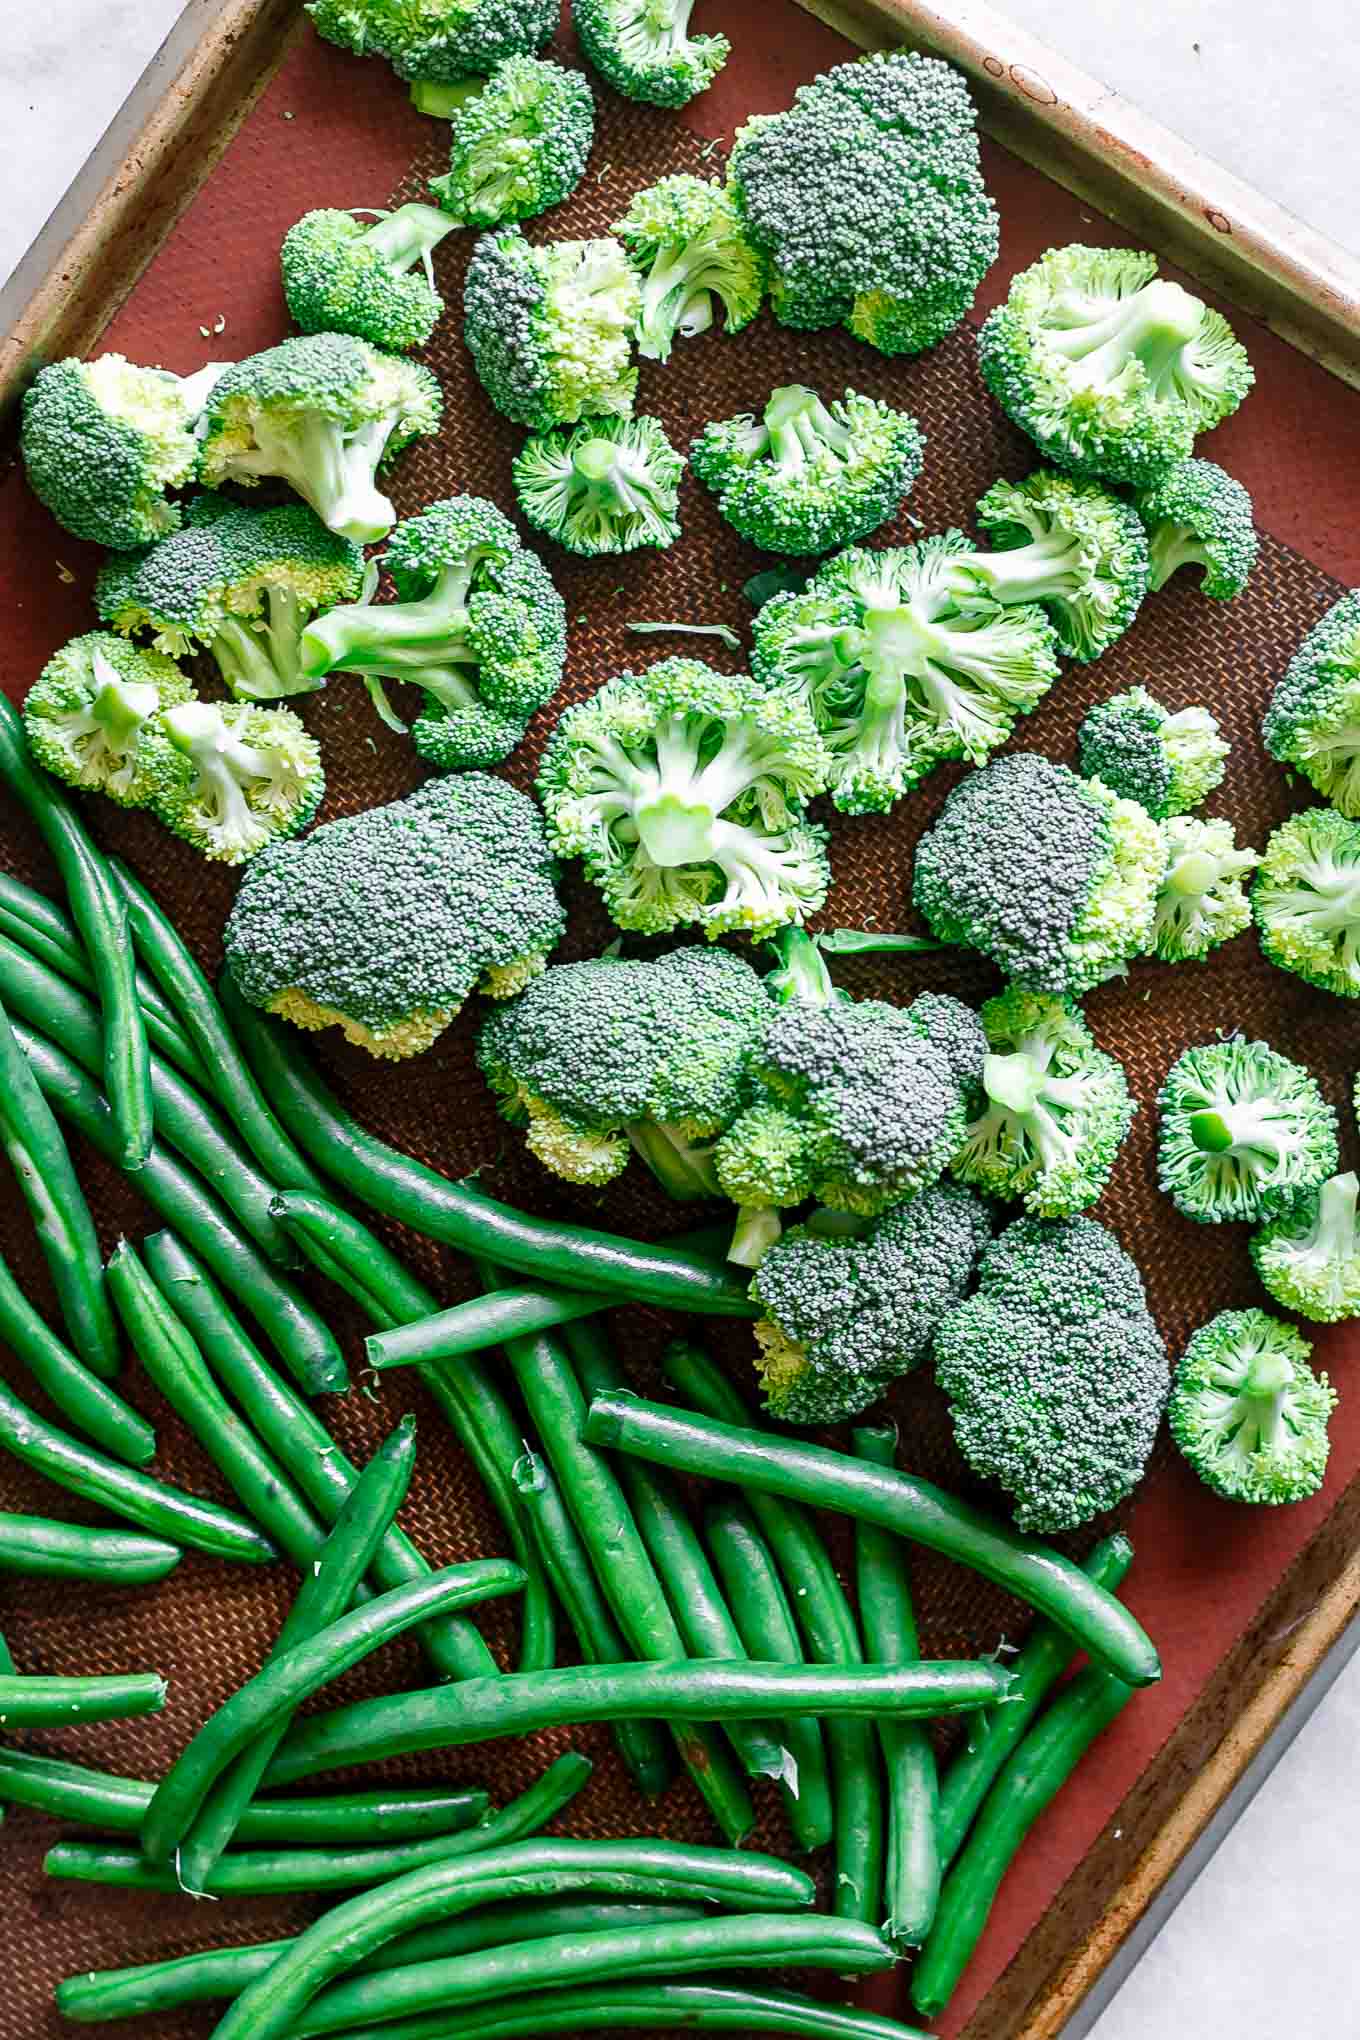 broccoli florets and green beans on a baking sheet before roasting